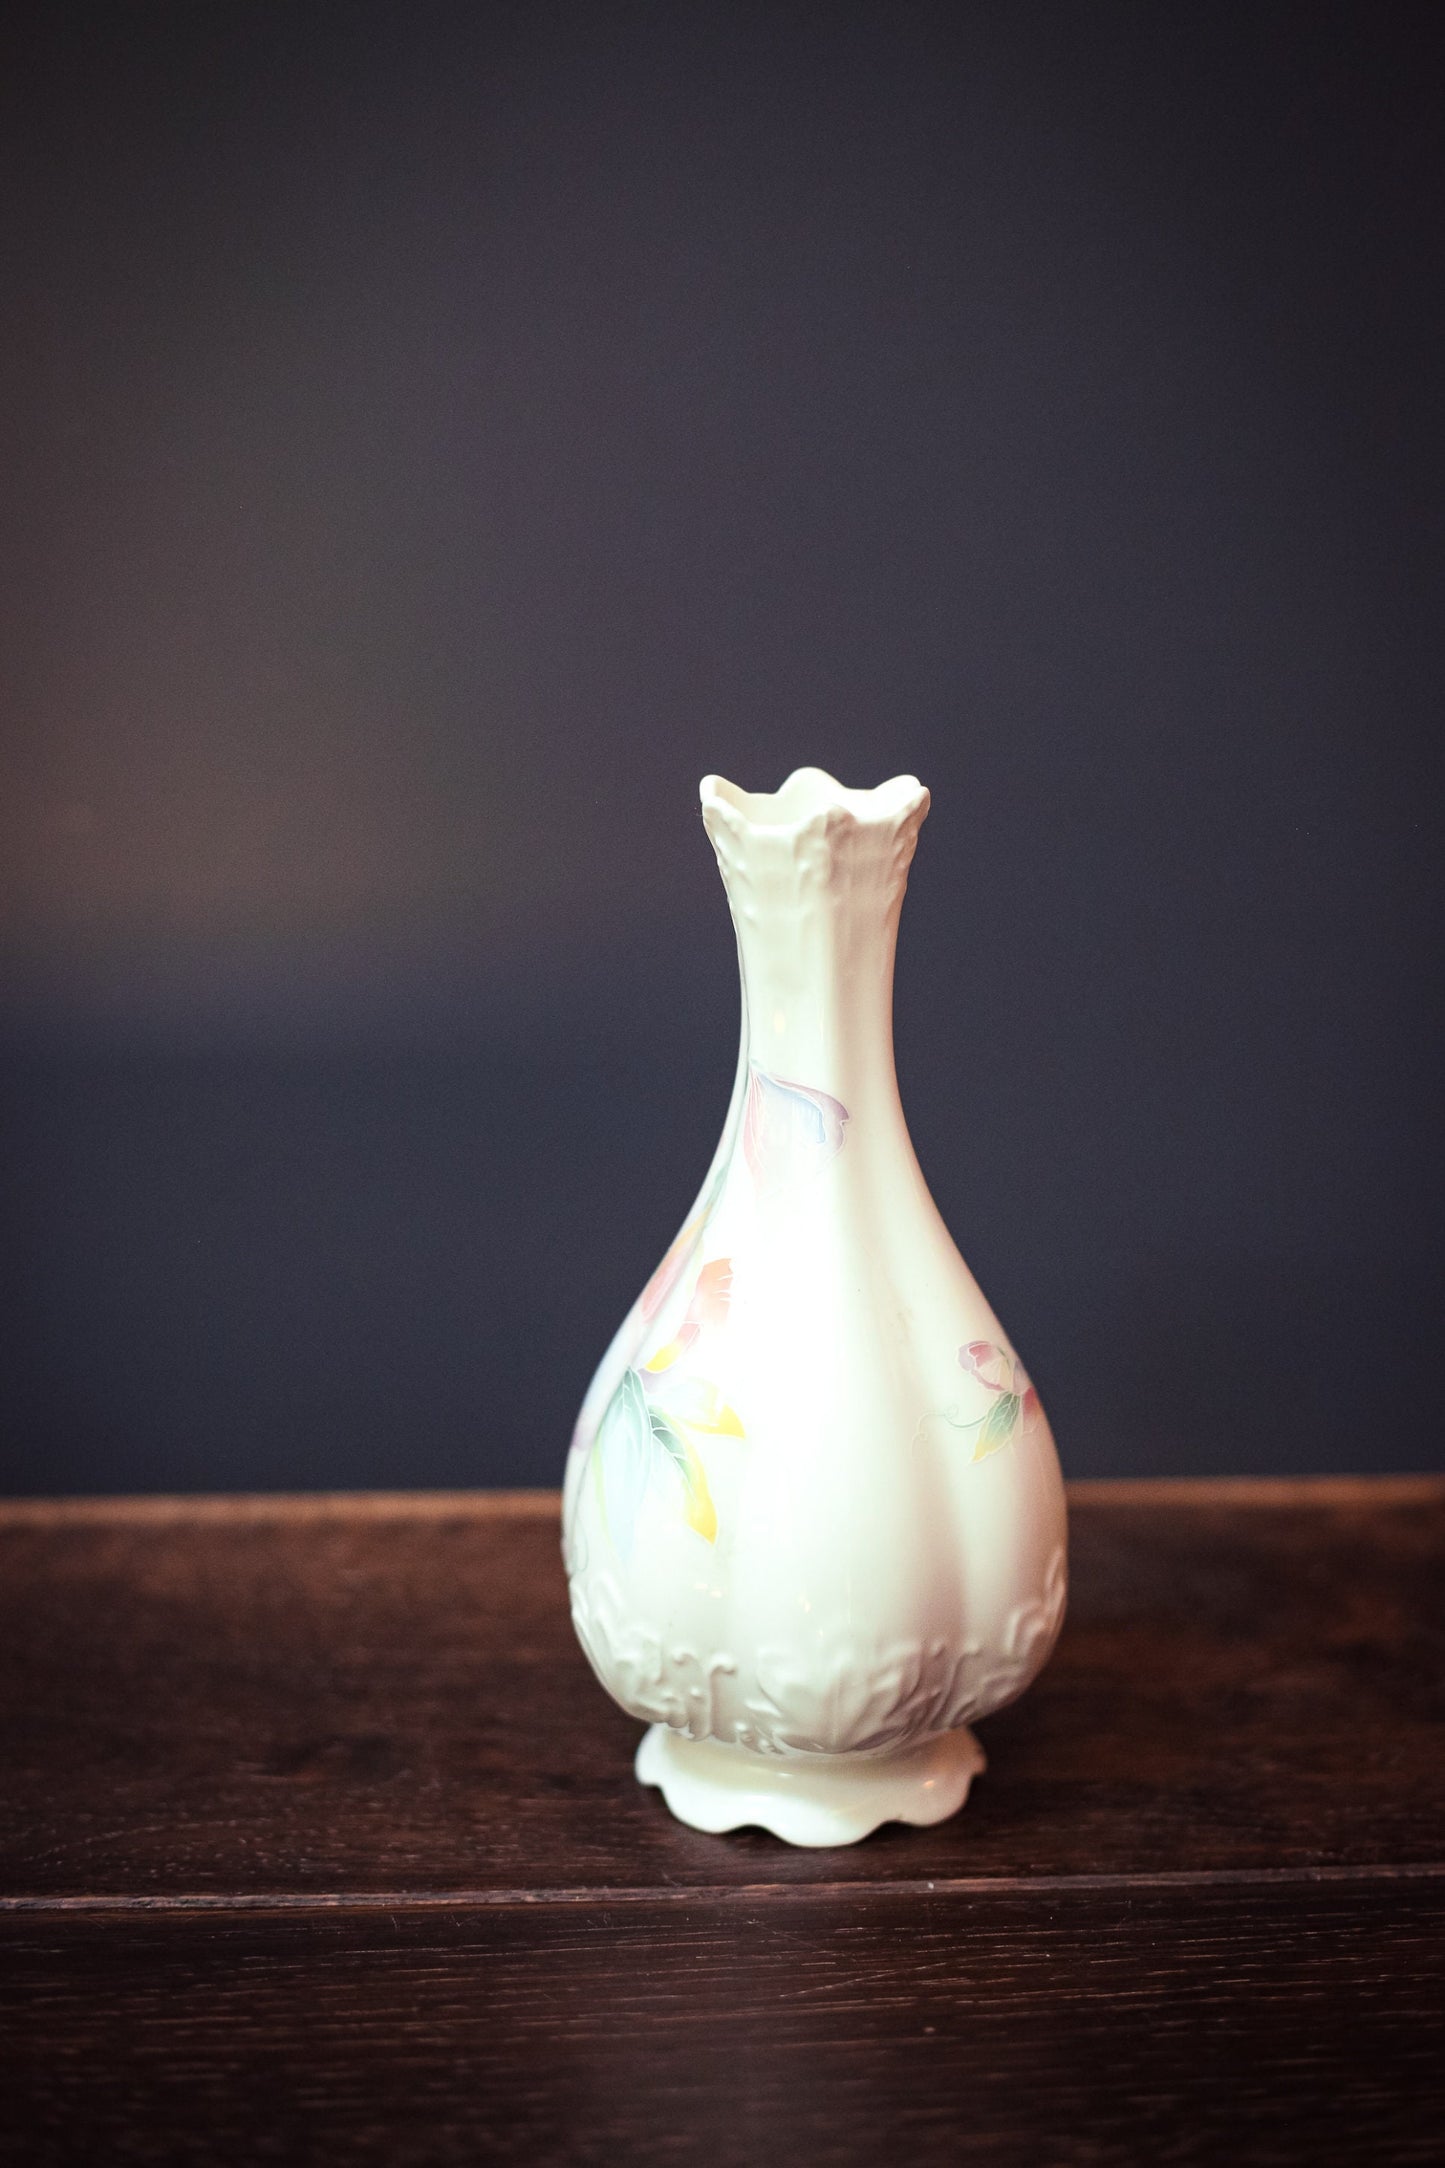 Pastel Watercolor Floral Porcelain Vase with Repousse and Scallop Edge Details - Vintage Aynsley Little Sweetheart Vase